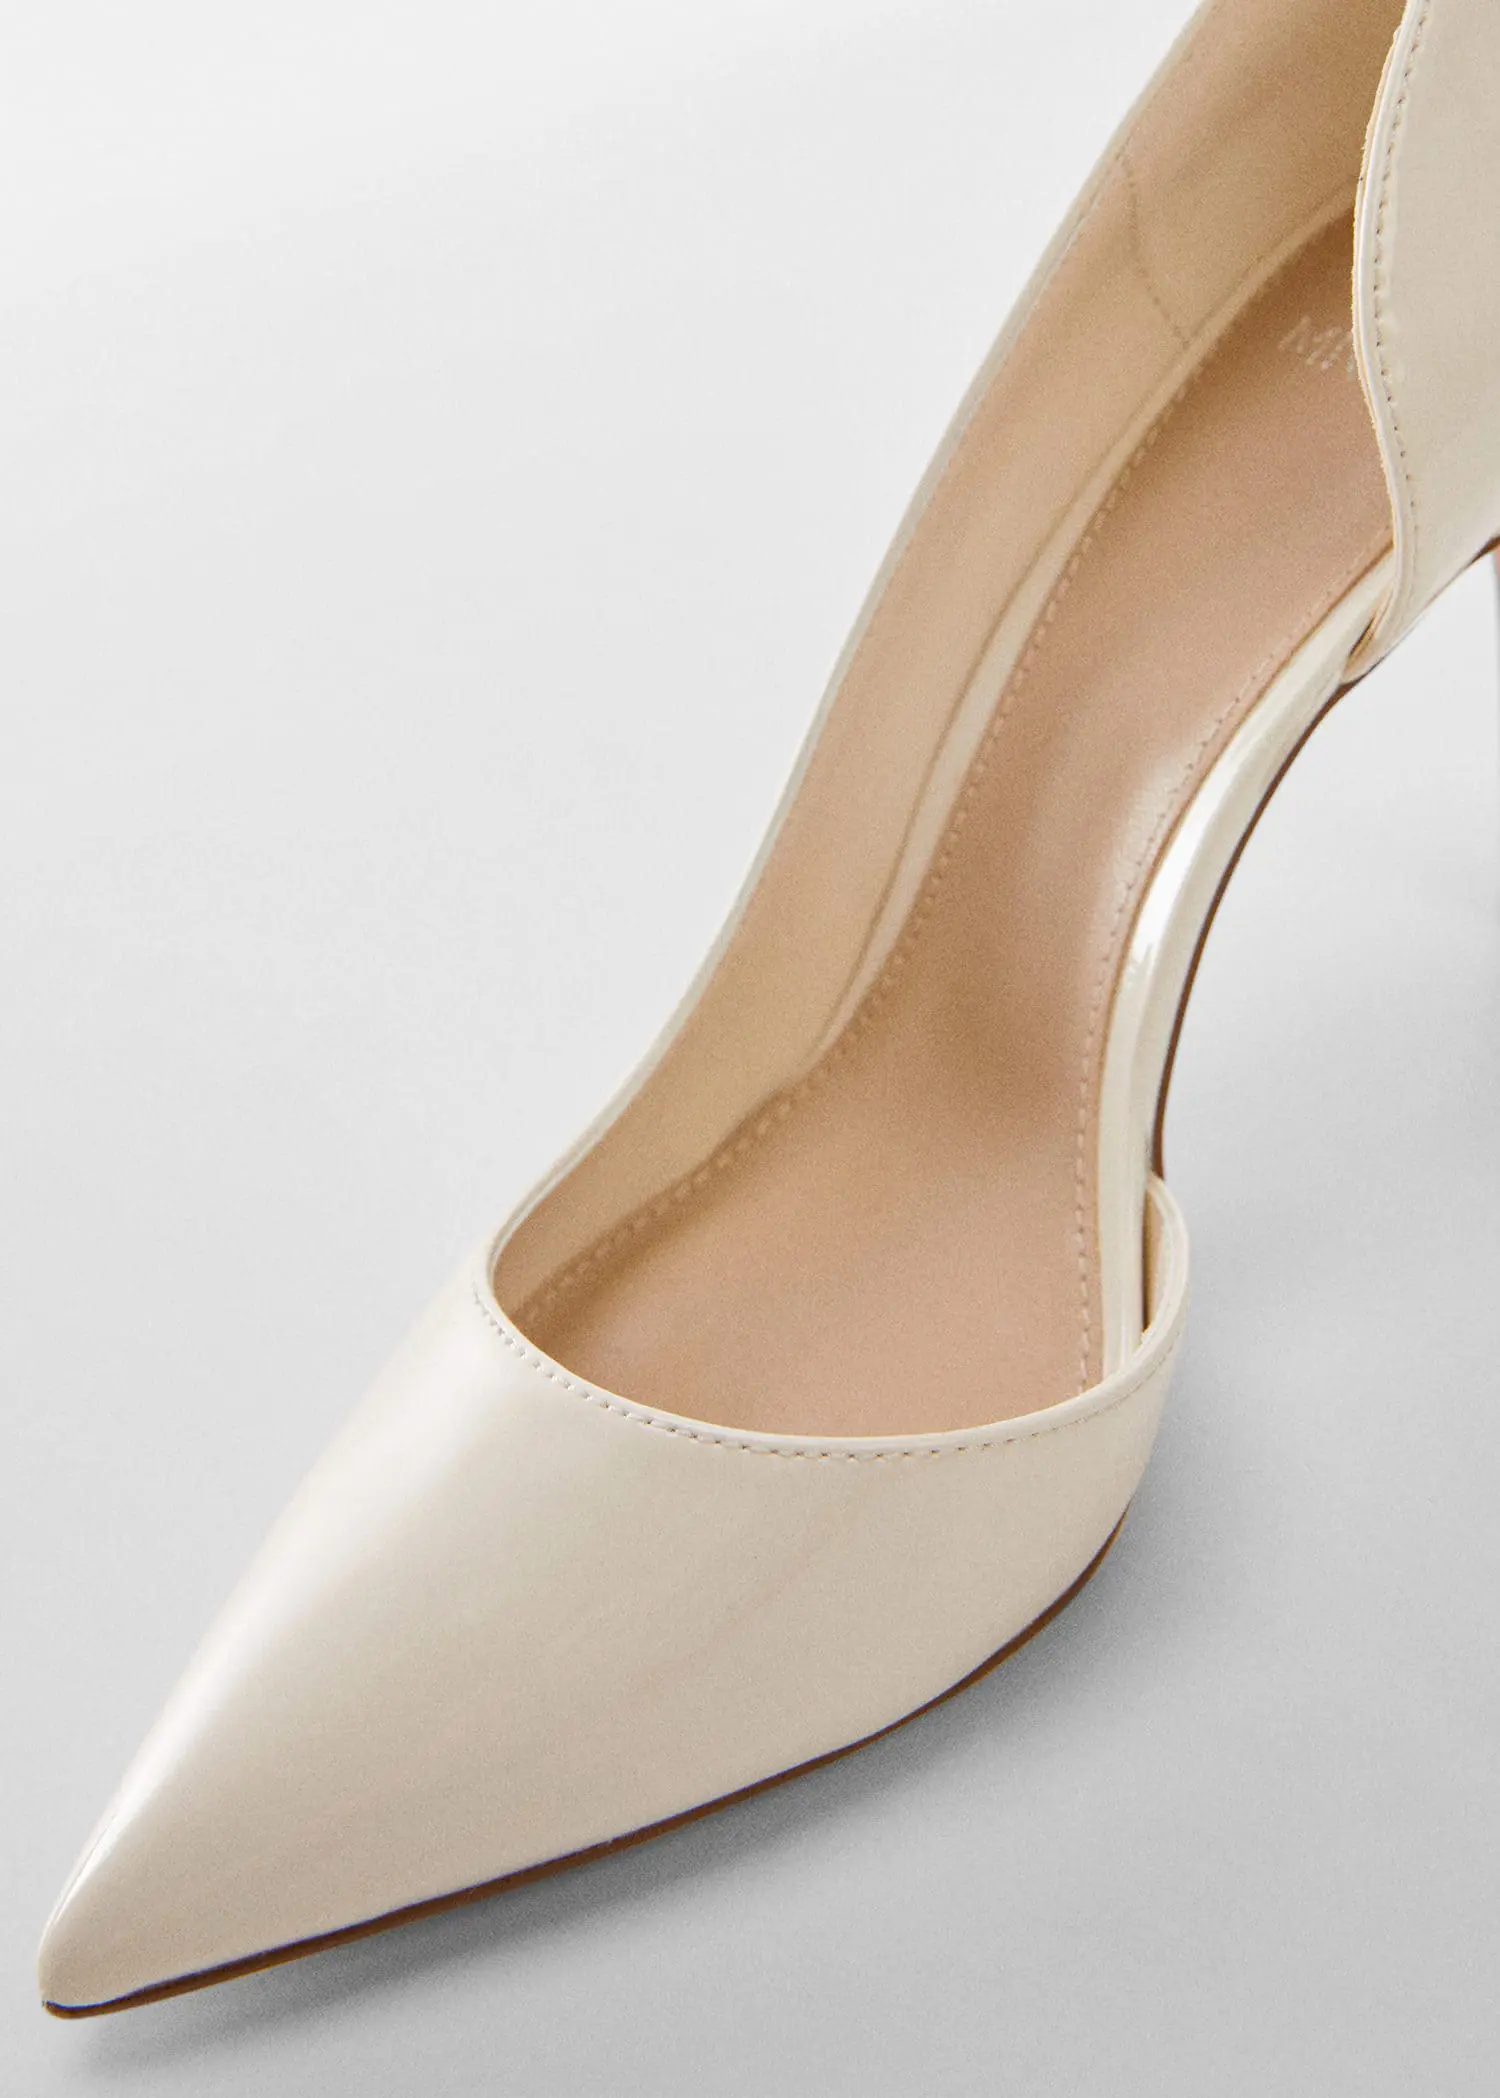 Mango Asymmetrical heeled shoes. a close-up of a pair of high heel shoes. 